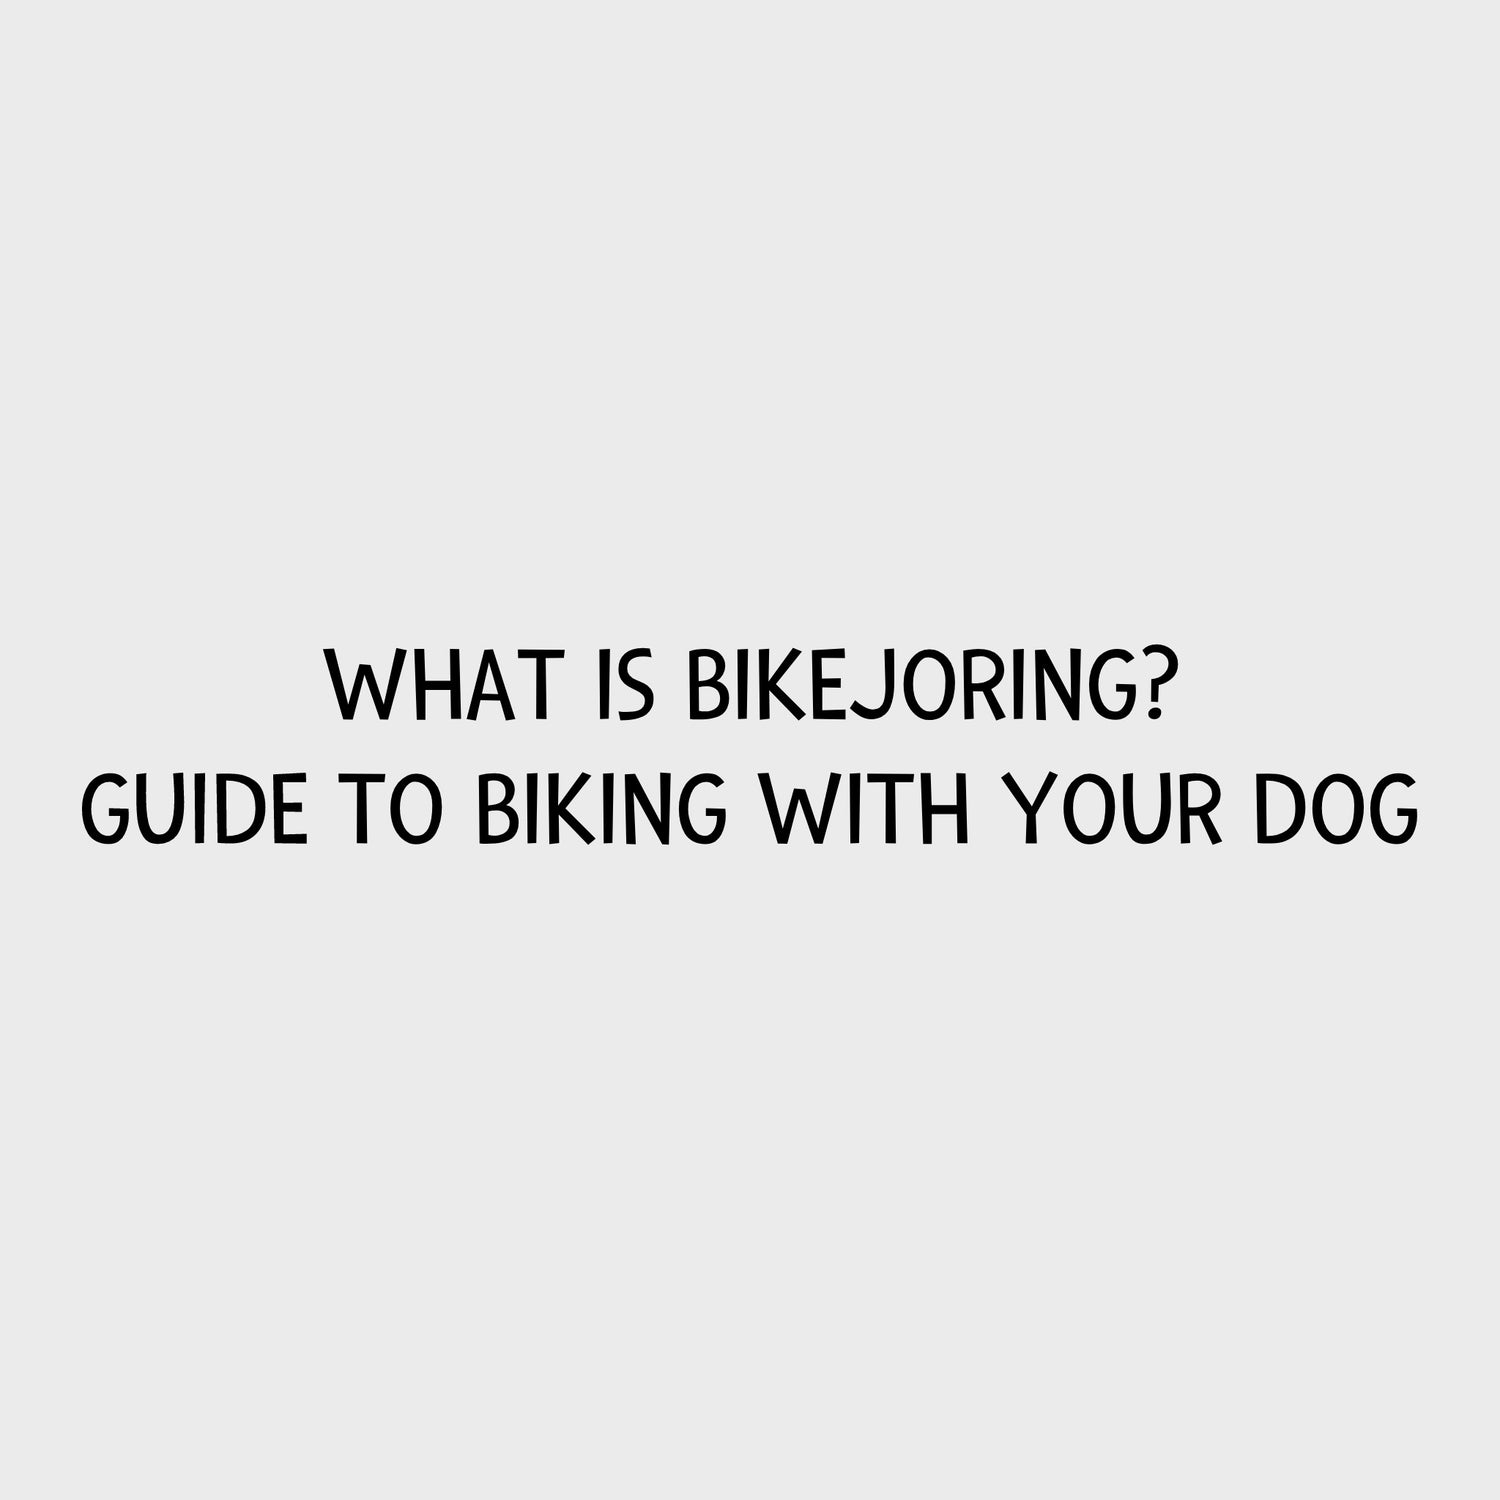 What is bikejoring? Guide to biking with your dog